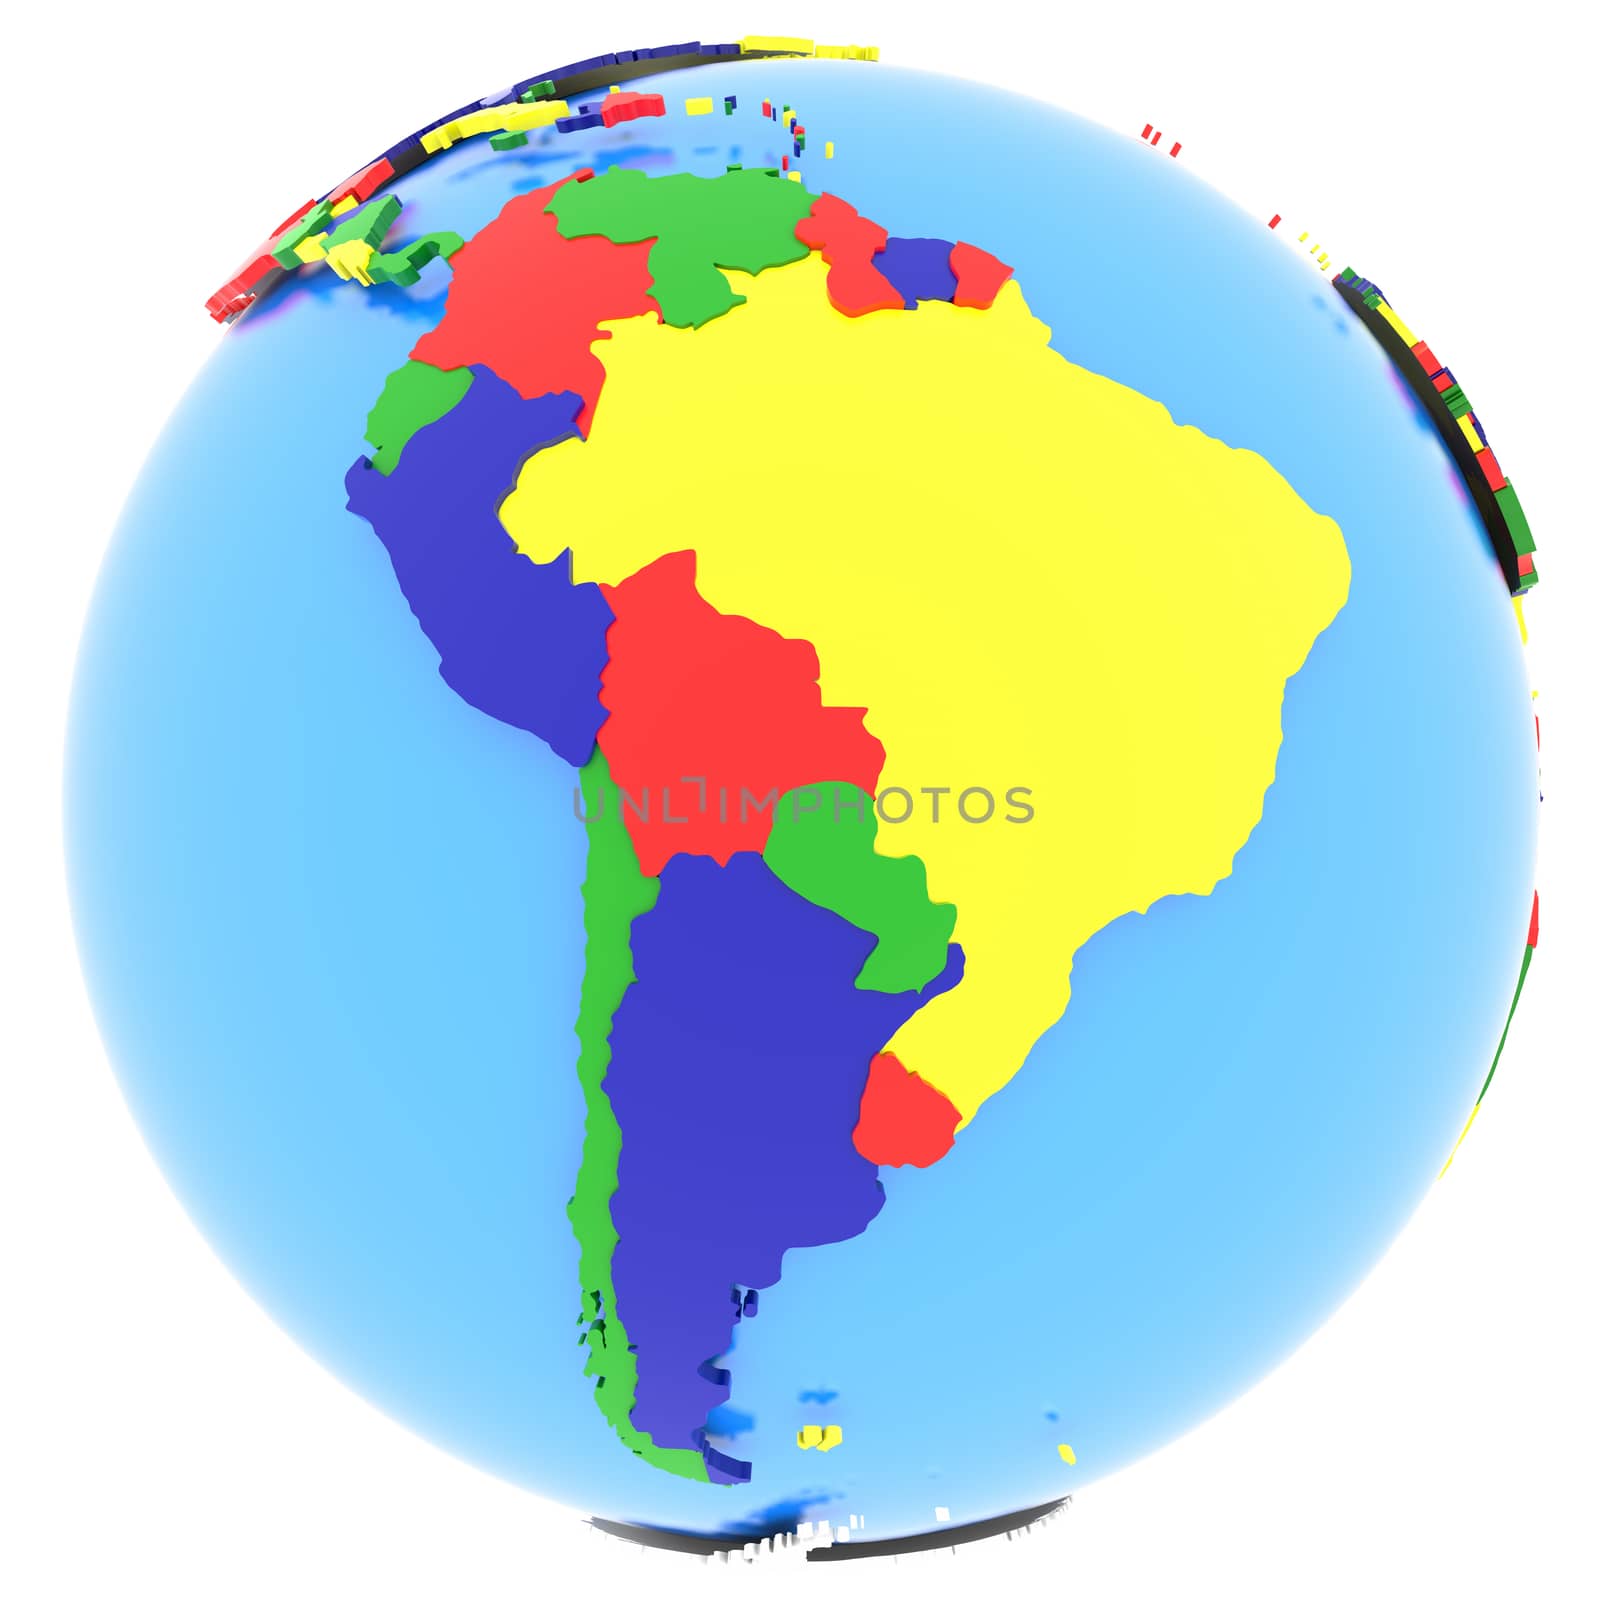 South America on Earth by Harvepino